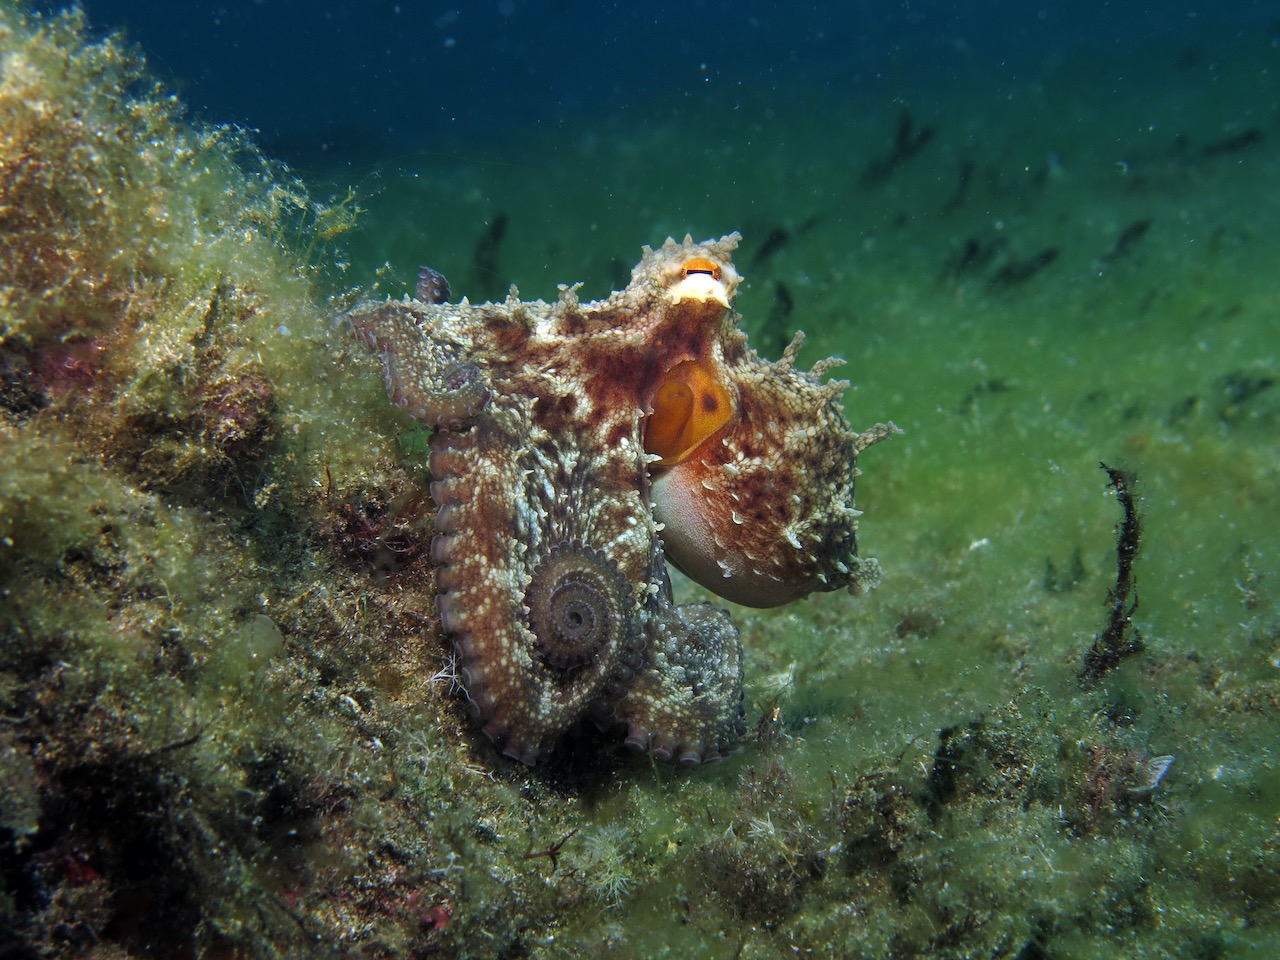 A common octopus changing color as it camouflages on a reef in the Canary Islands, one of the best destinations for octopus